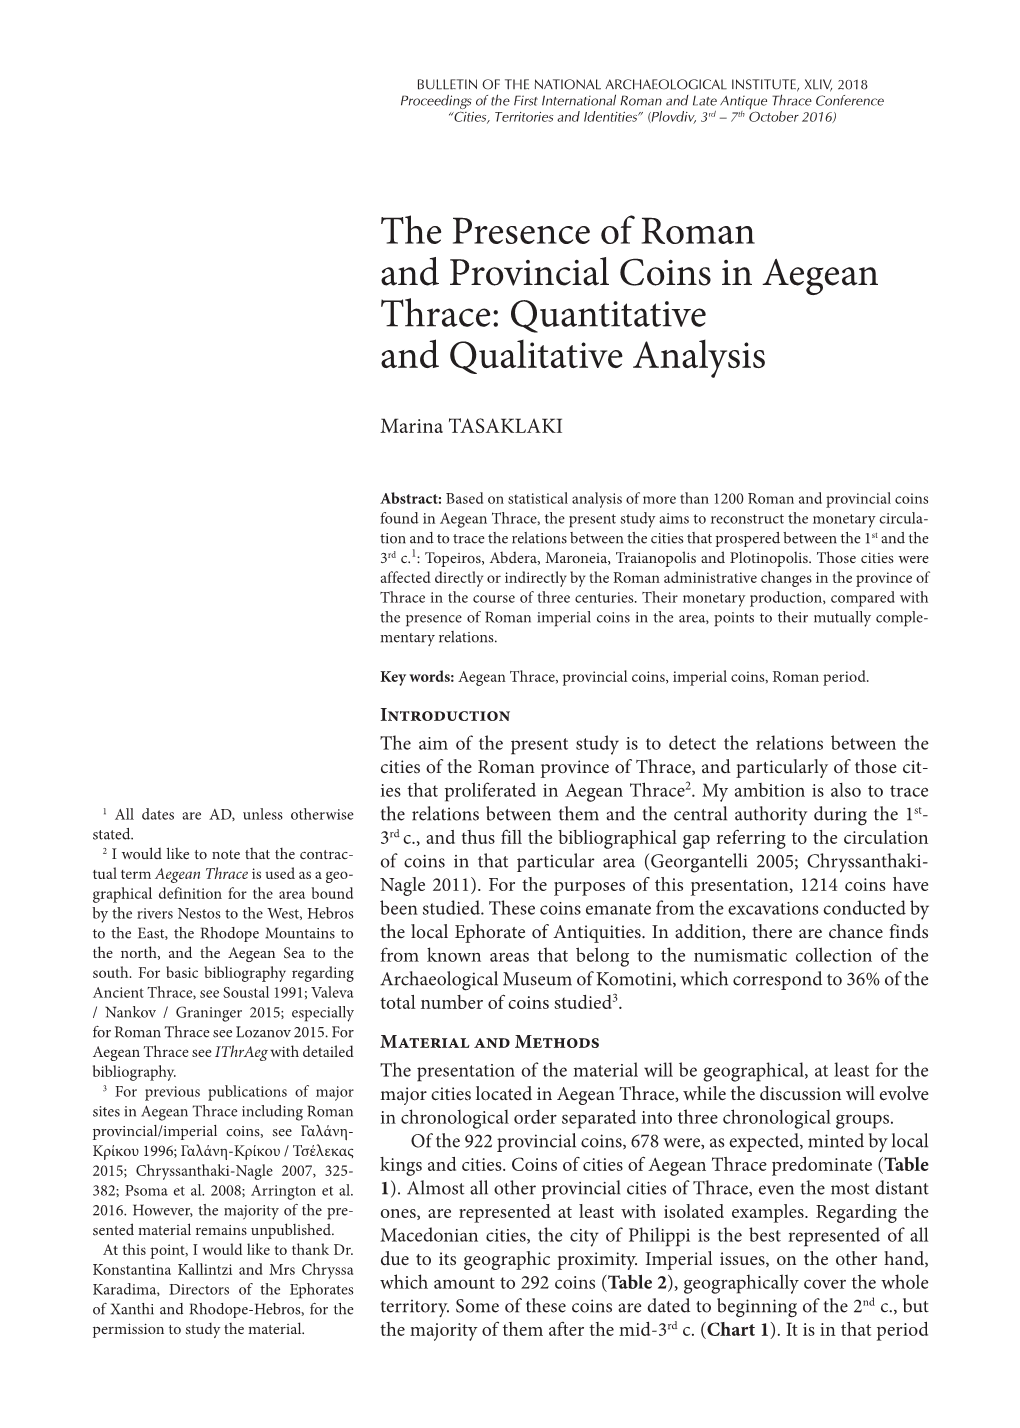 The Presence of Roman and Provincial Coins in Aegean Thrace: Quantitative and Qualitative Analysis